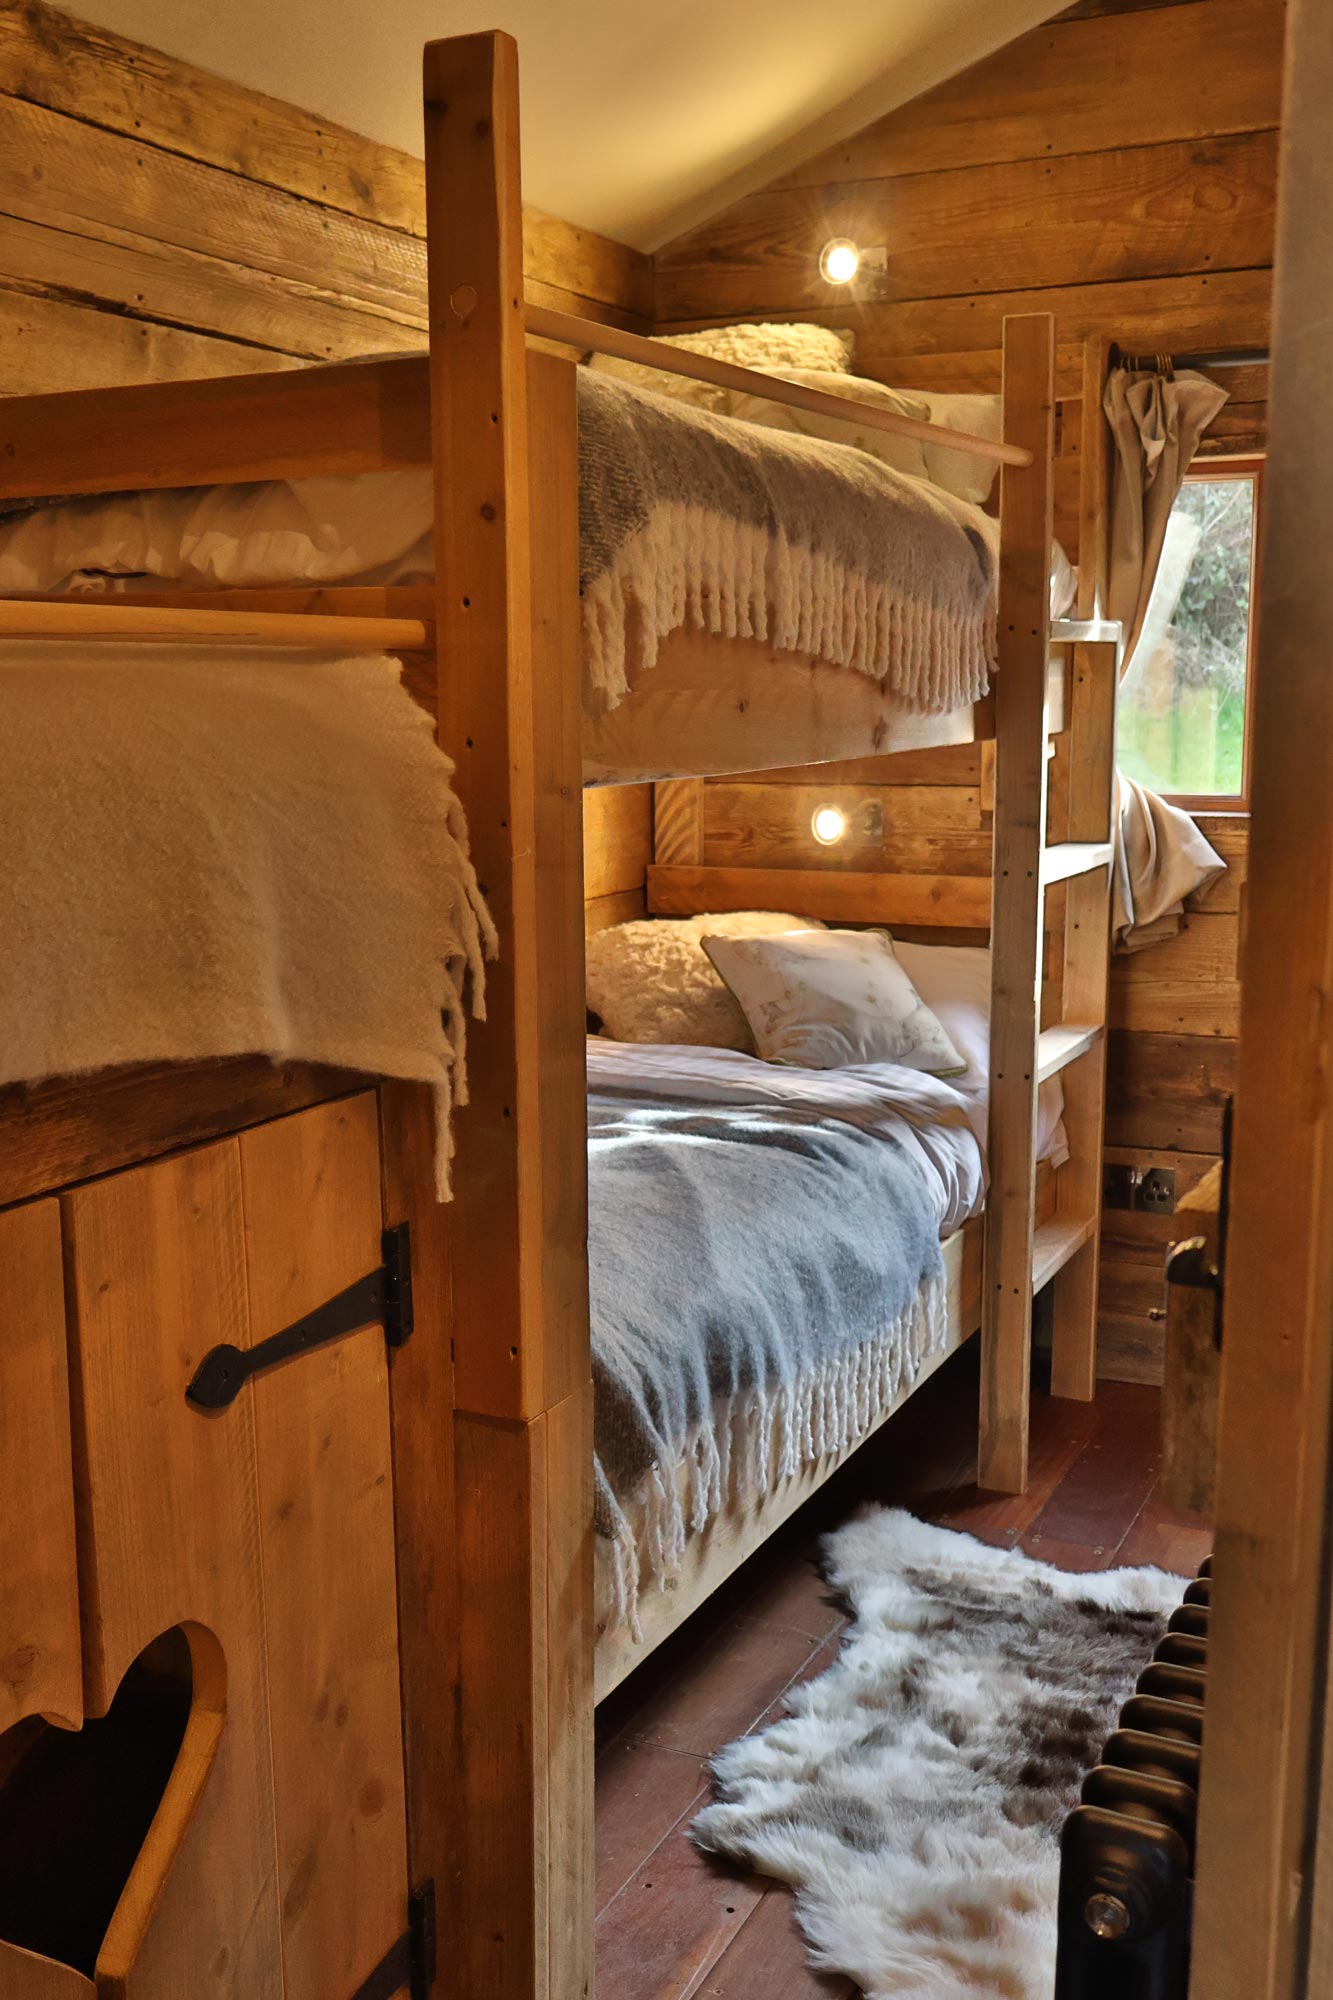 Beautiful wooden carved bunk beds in children's room of family holiday cabin.